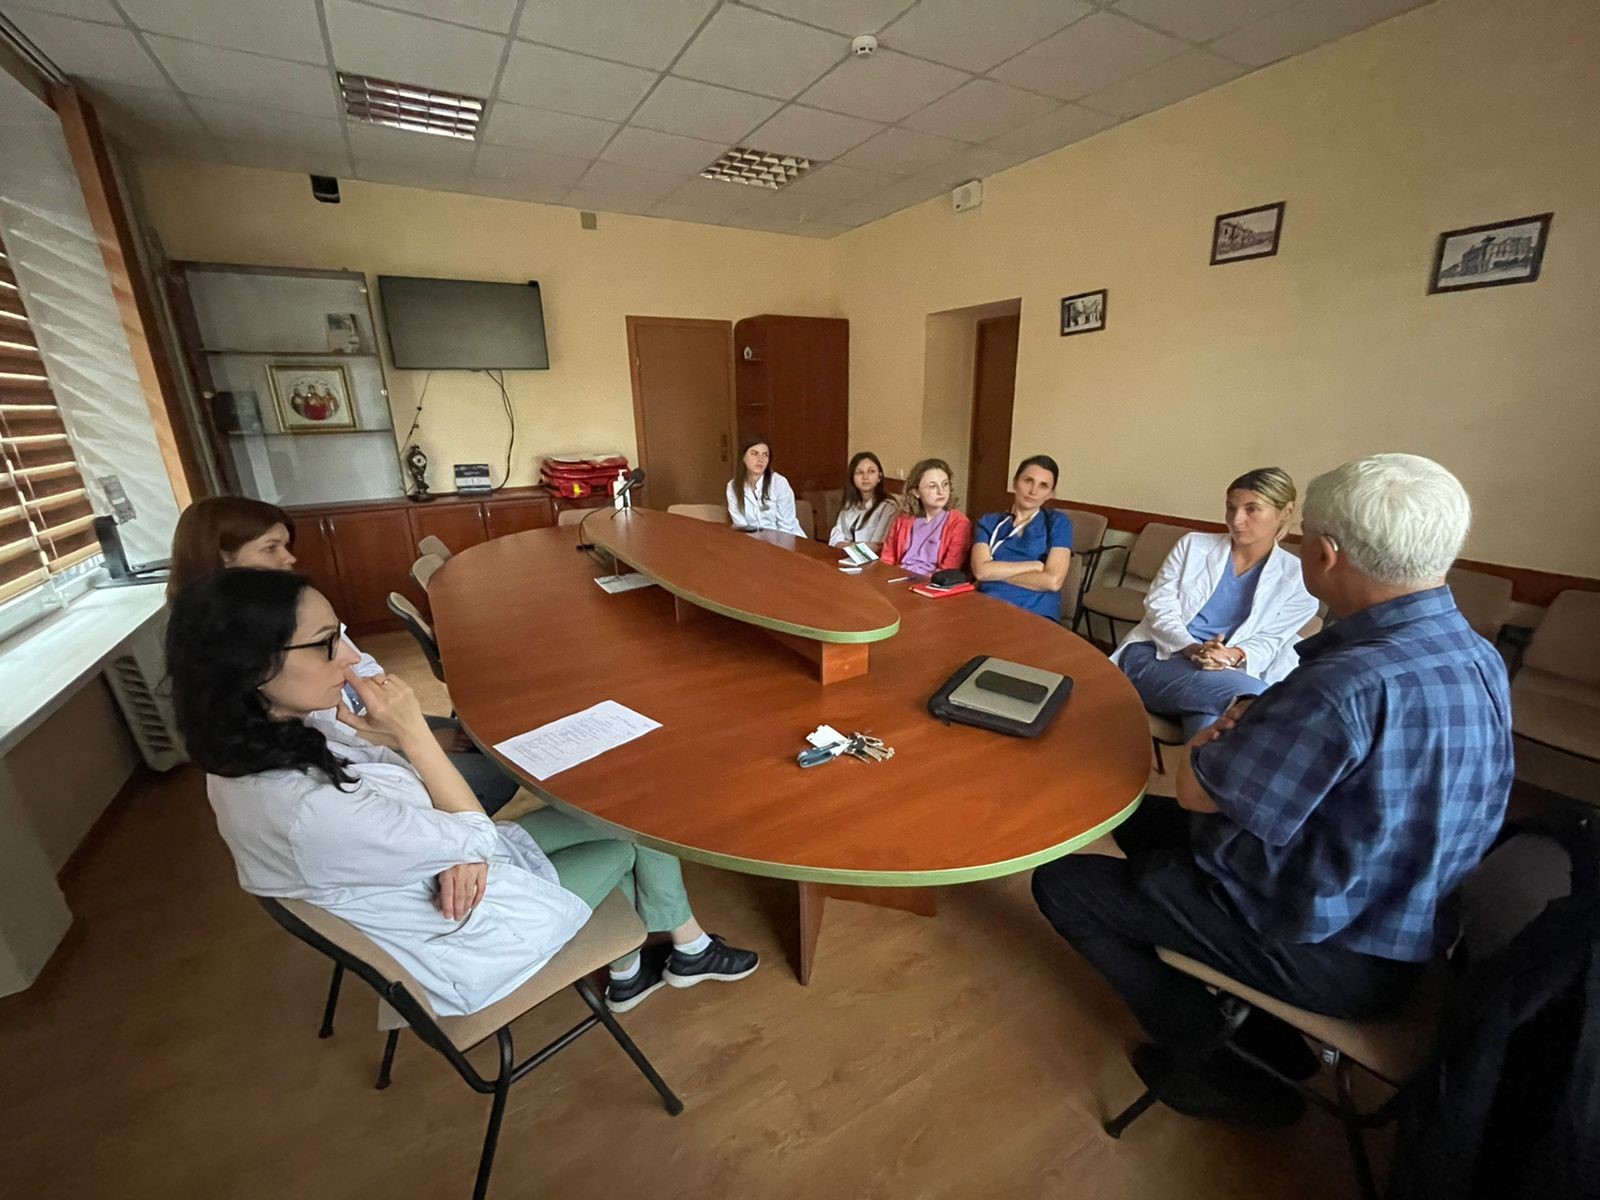 A photo of Dr. Runge's first trip working with physicians in Ivano-Frankivsk.